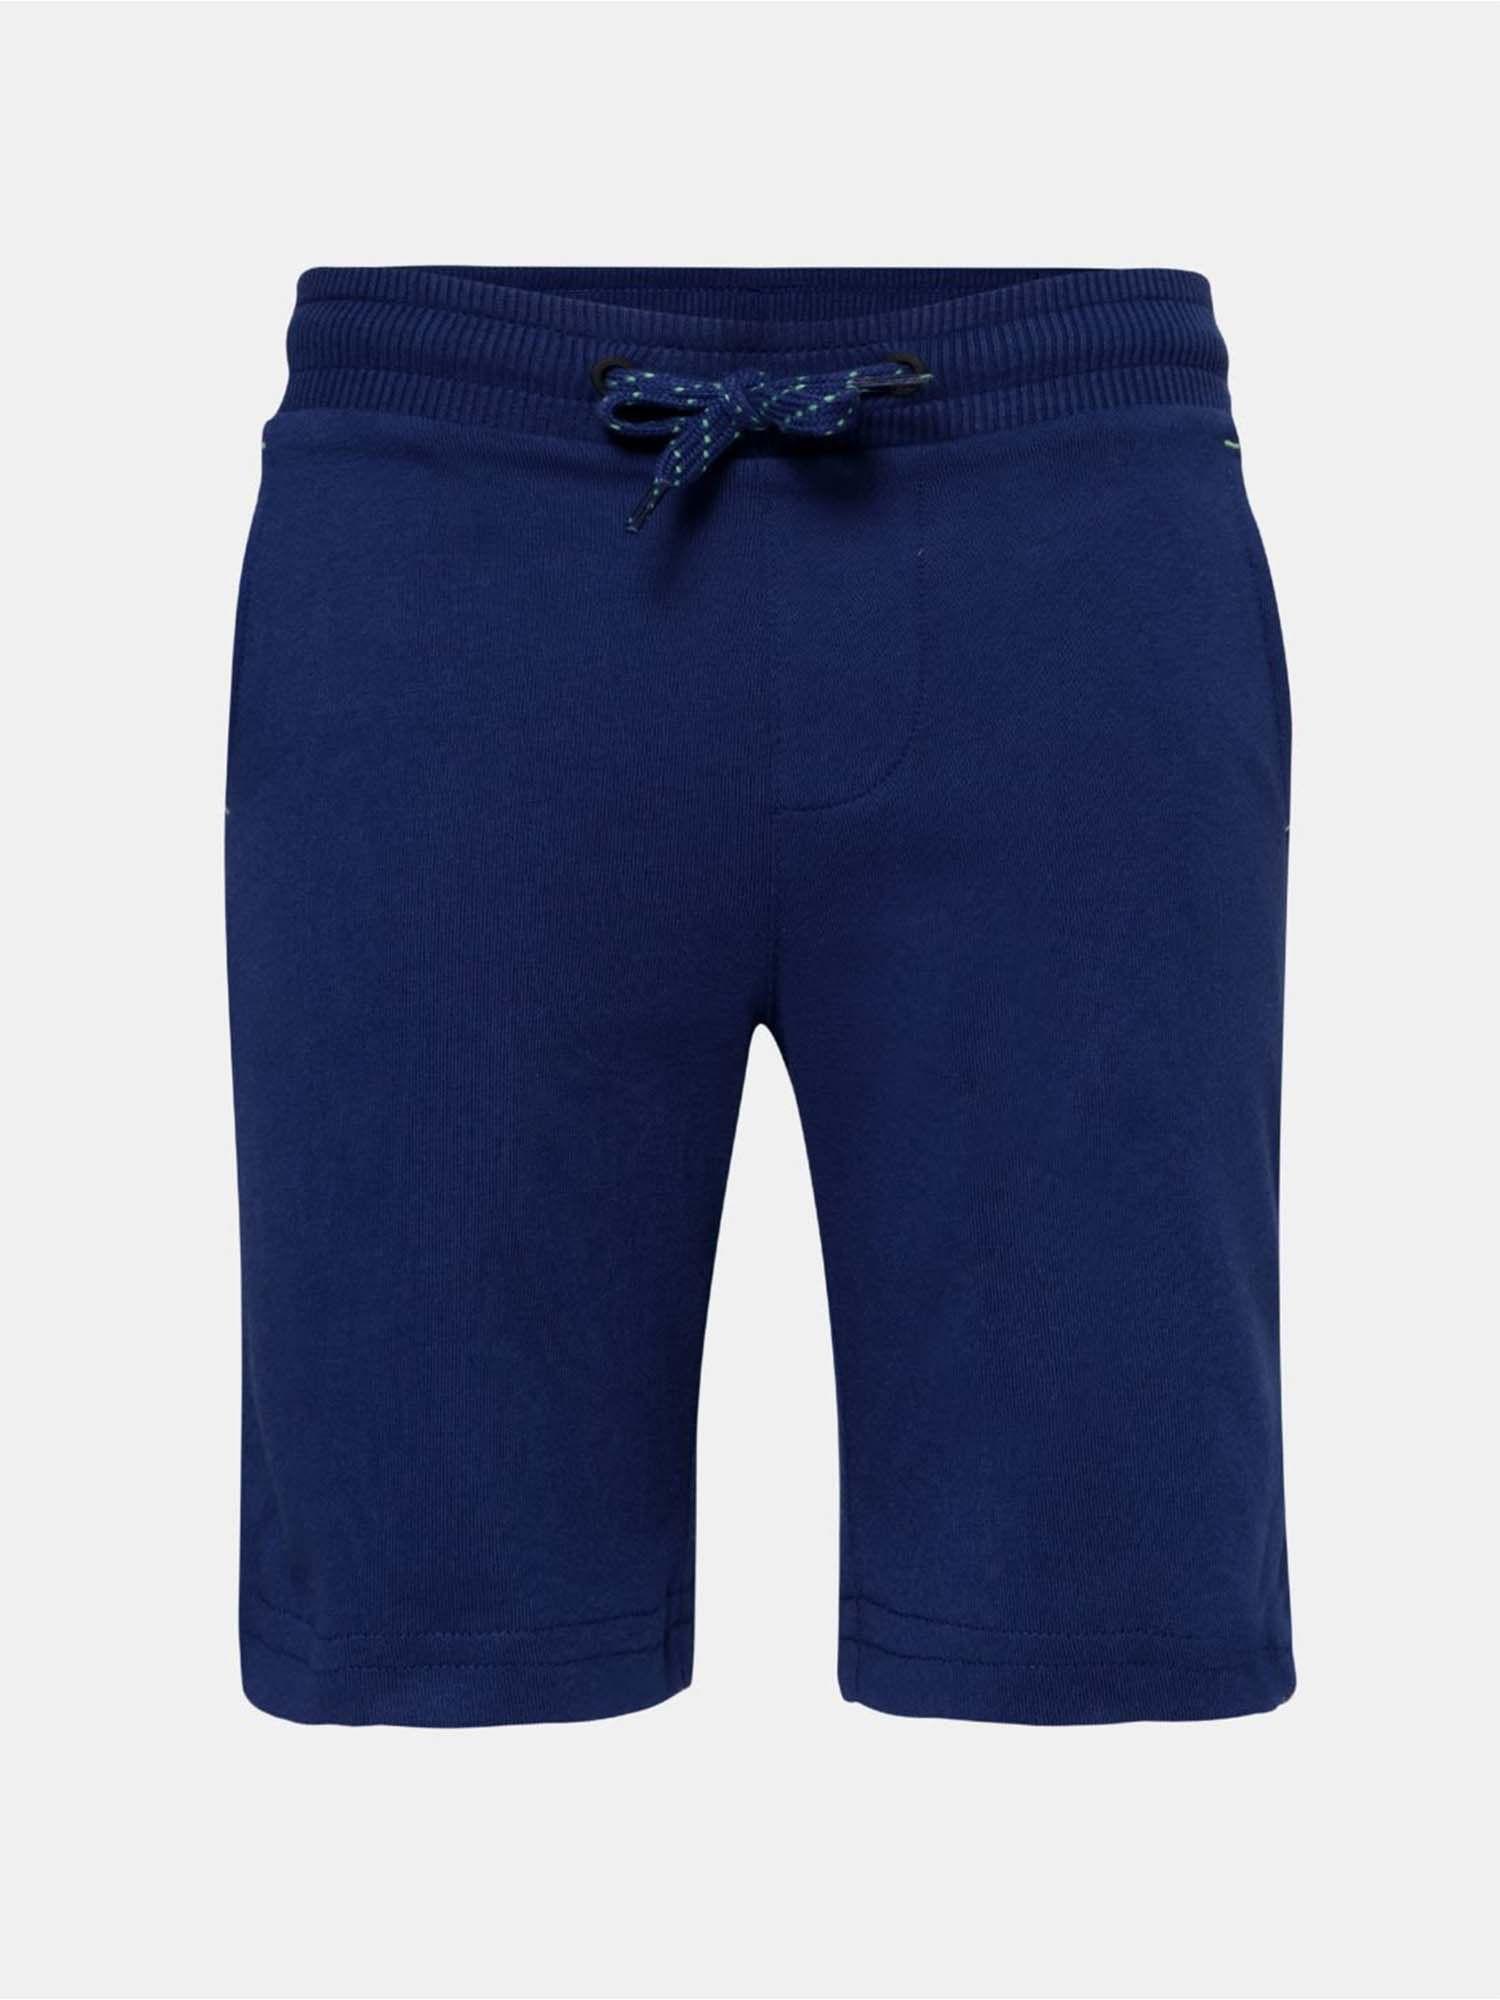 blue depth shorts - style number - (ab30)